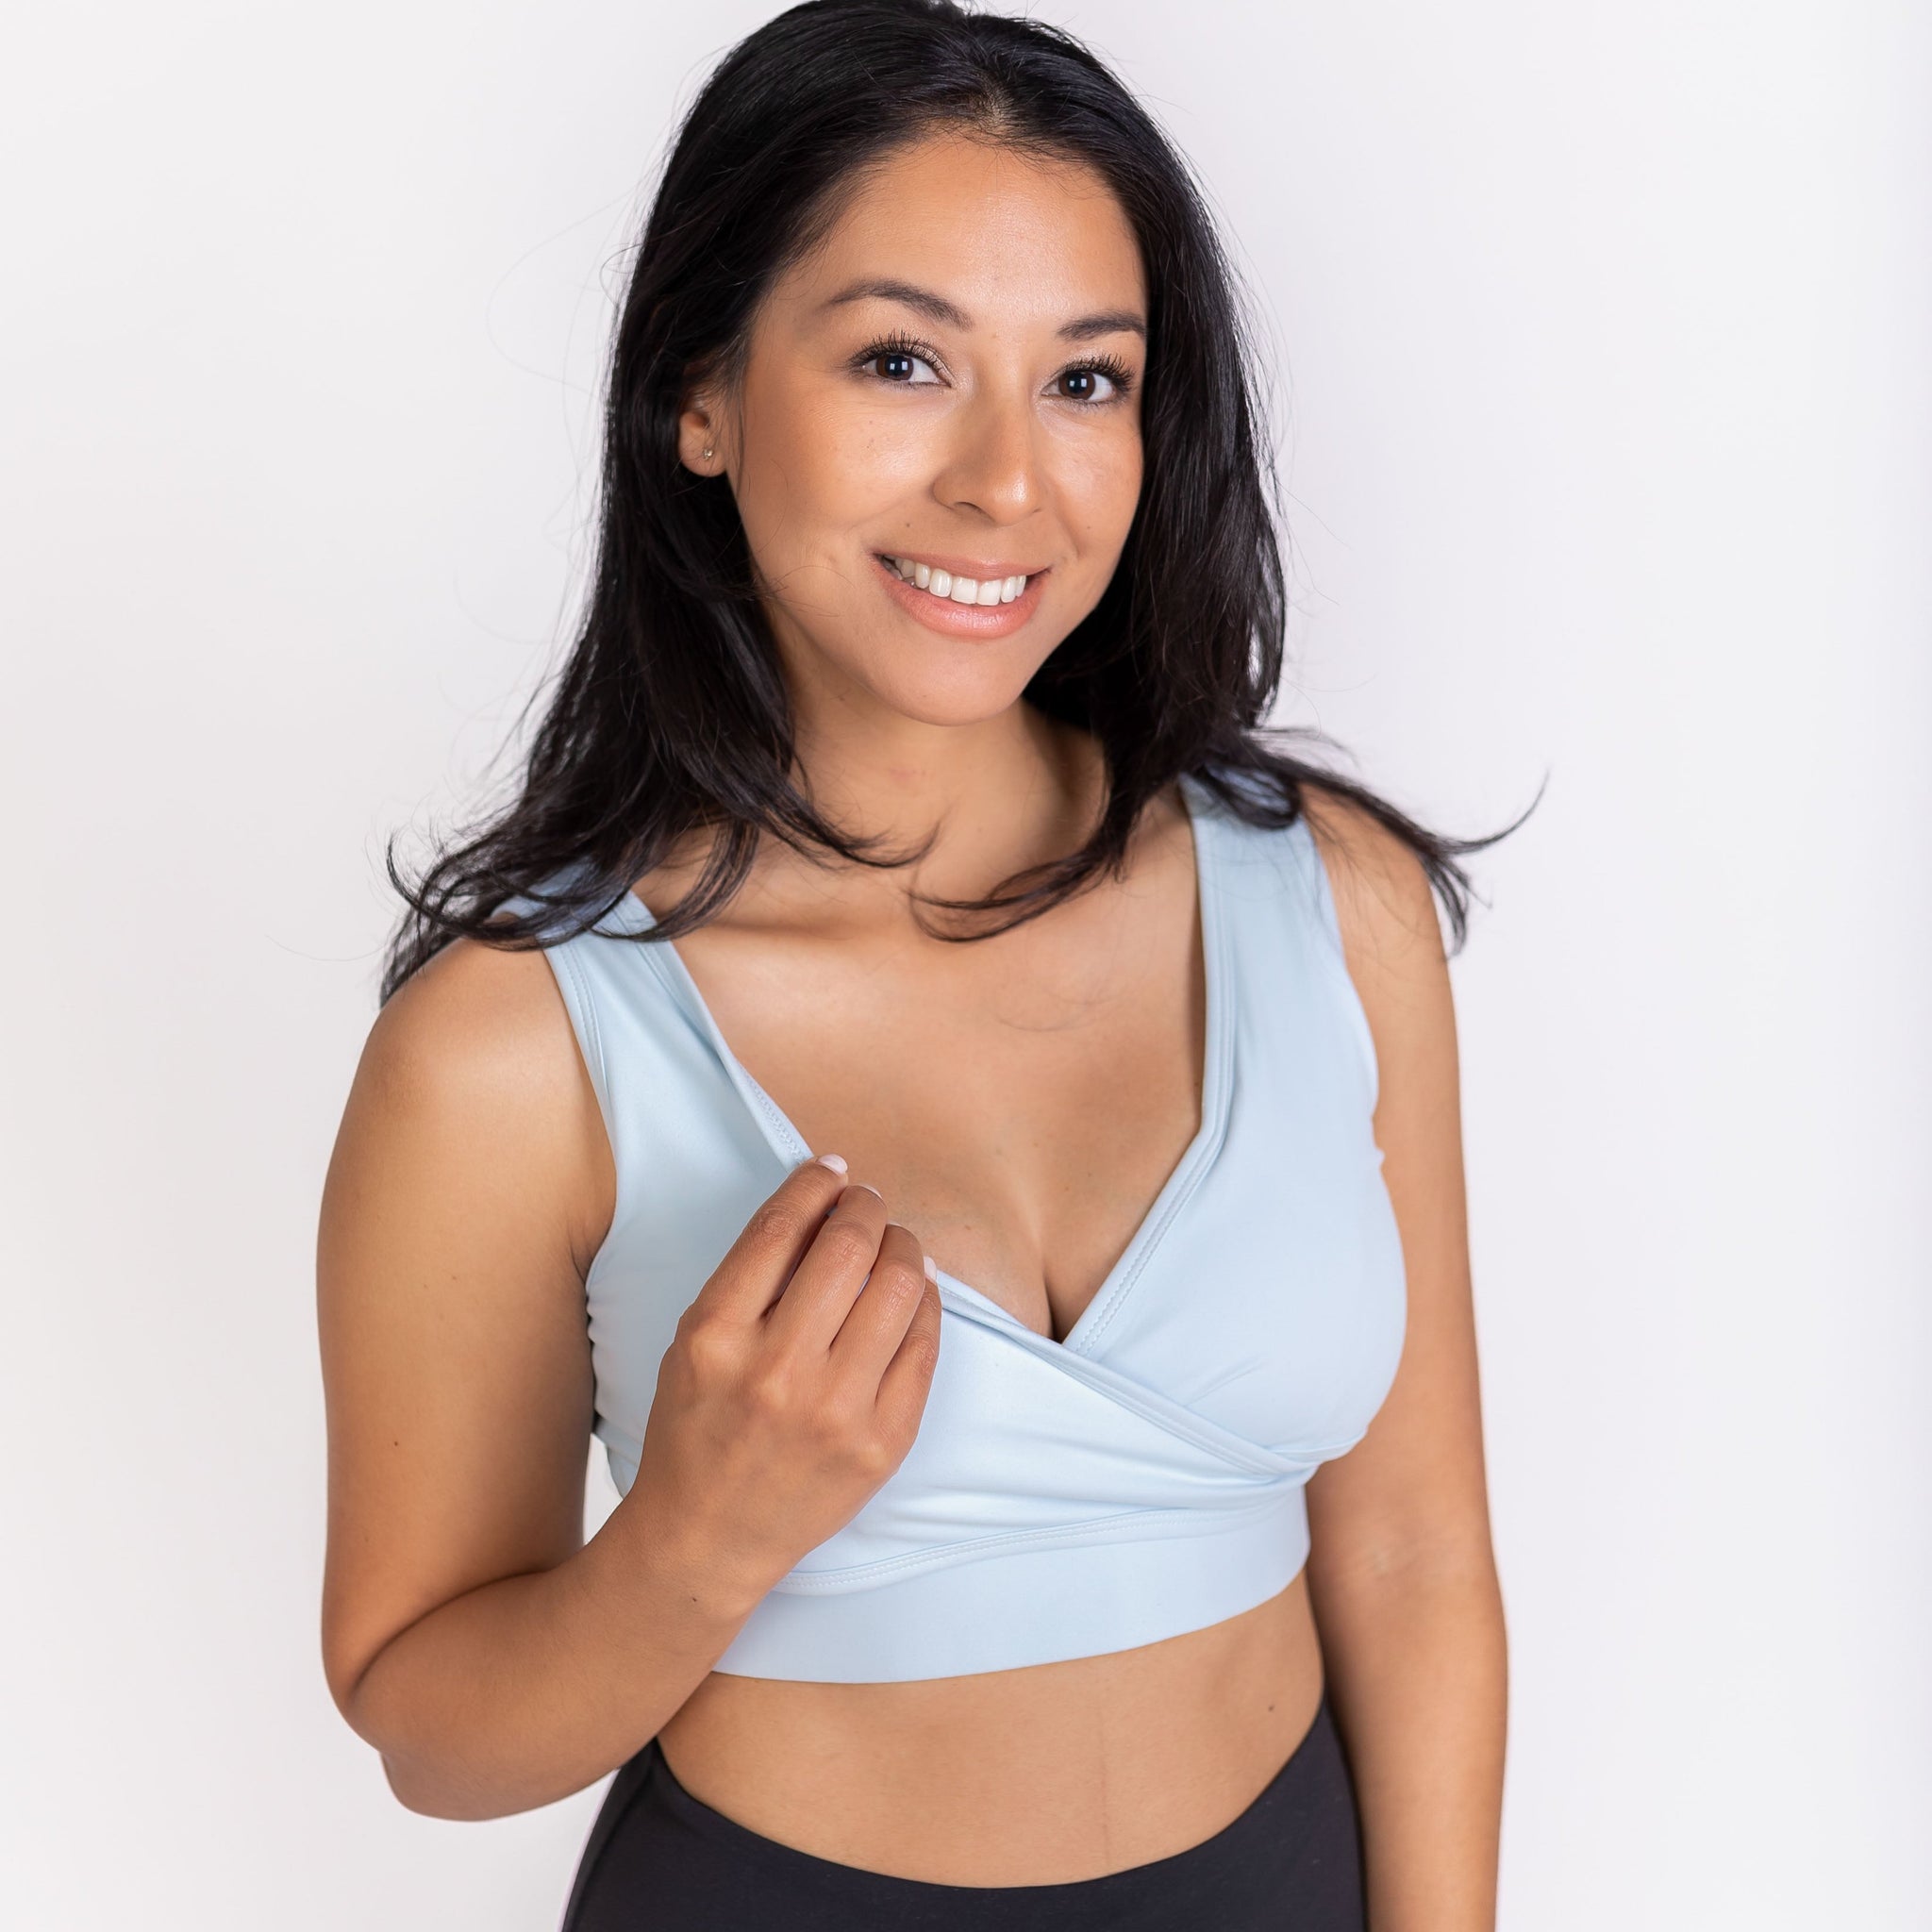 Products We Love: Lilu, Hands-Free Pumping Bra with Built-In